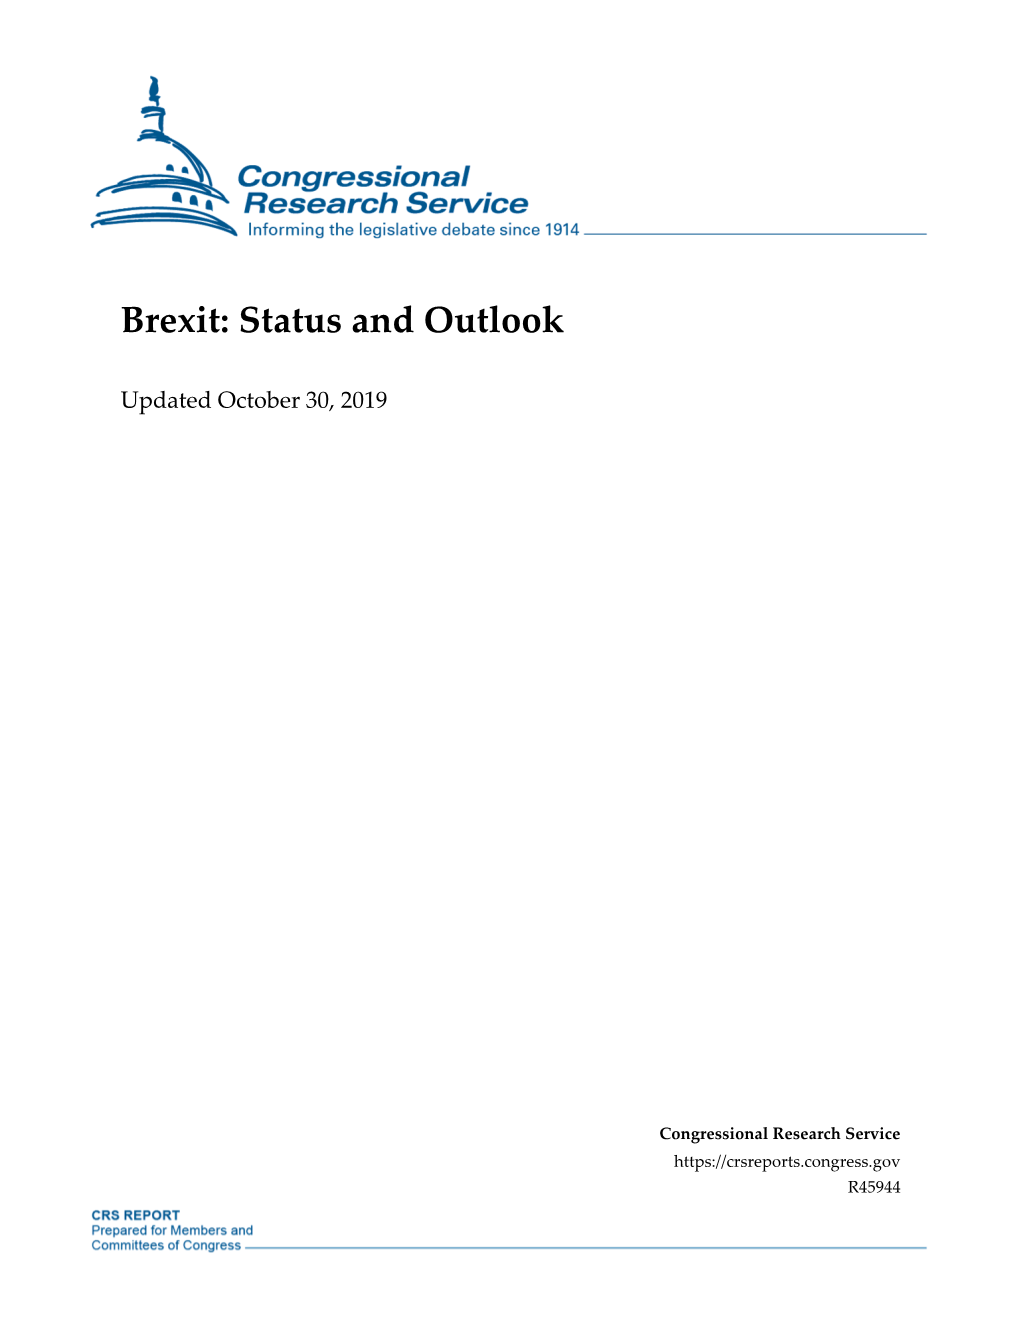 Brexit: Status and Outlook